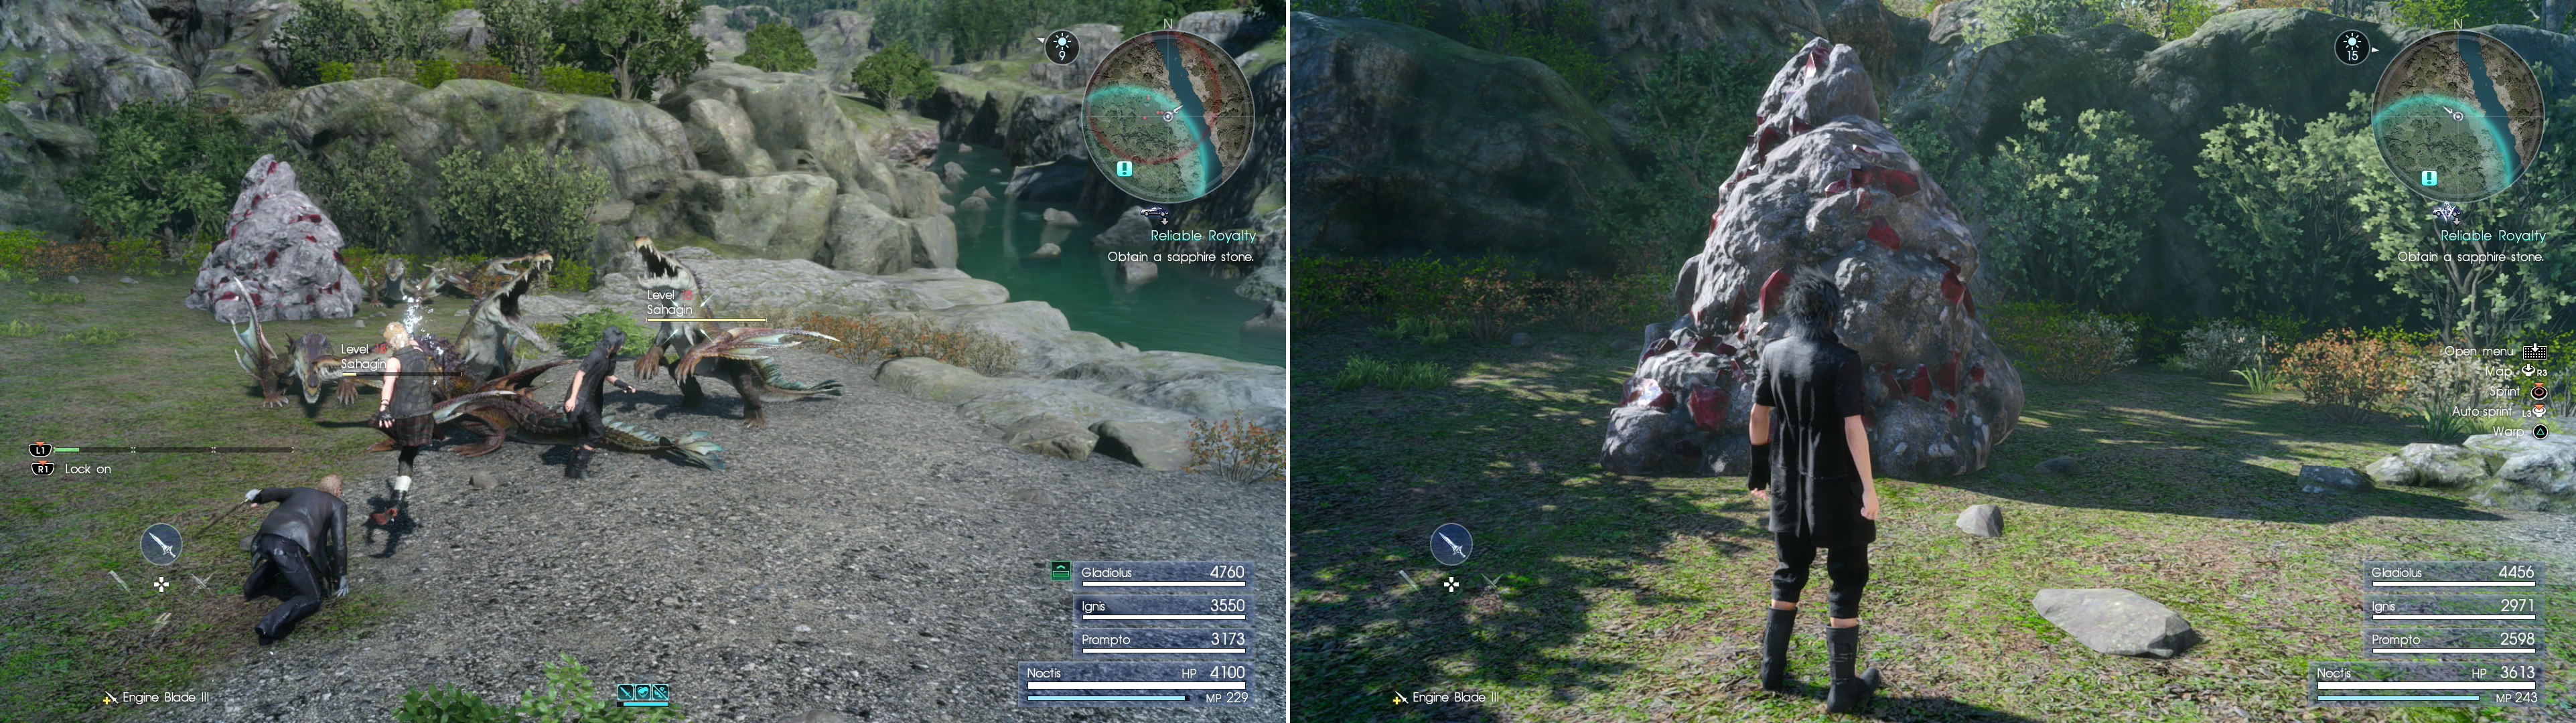 Kill the Sahagins nearby (left) then claim the Sapphire Stone from the Mineral Deposit near the Wennath River (right).